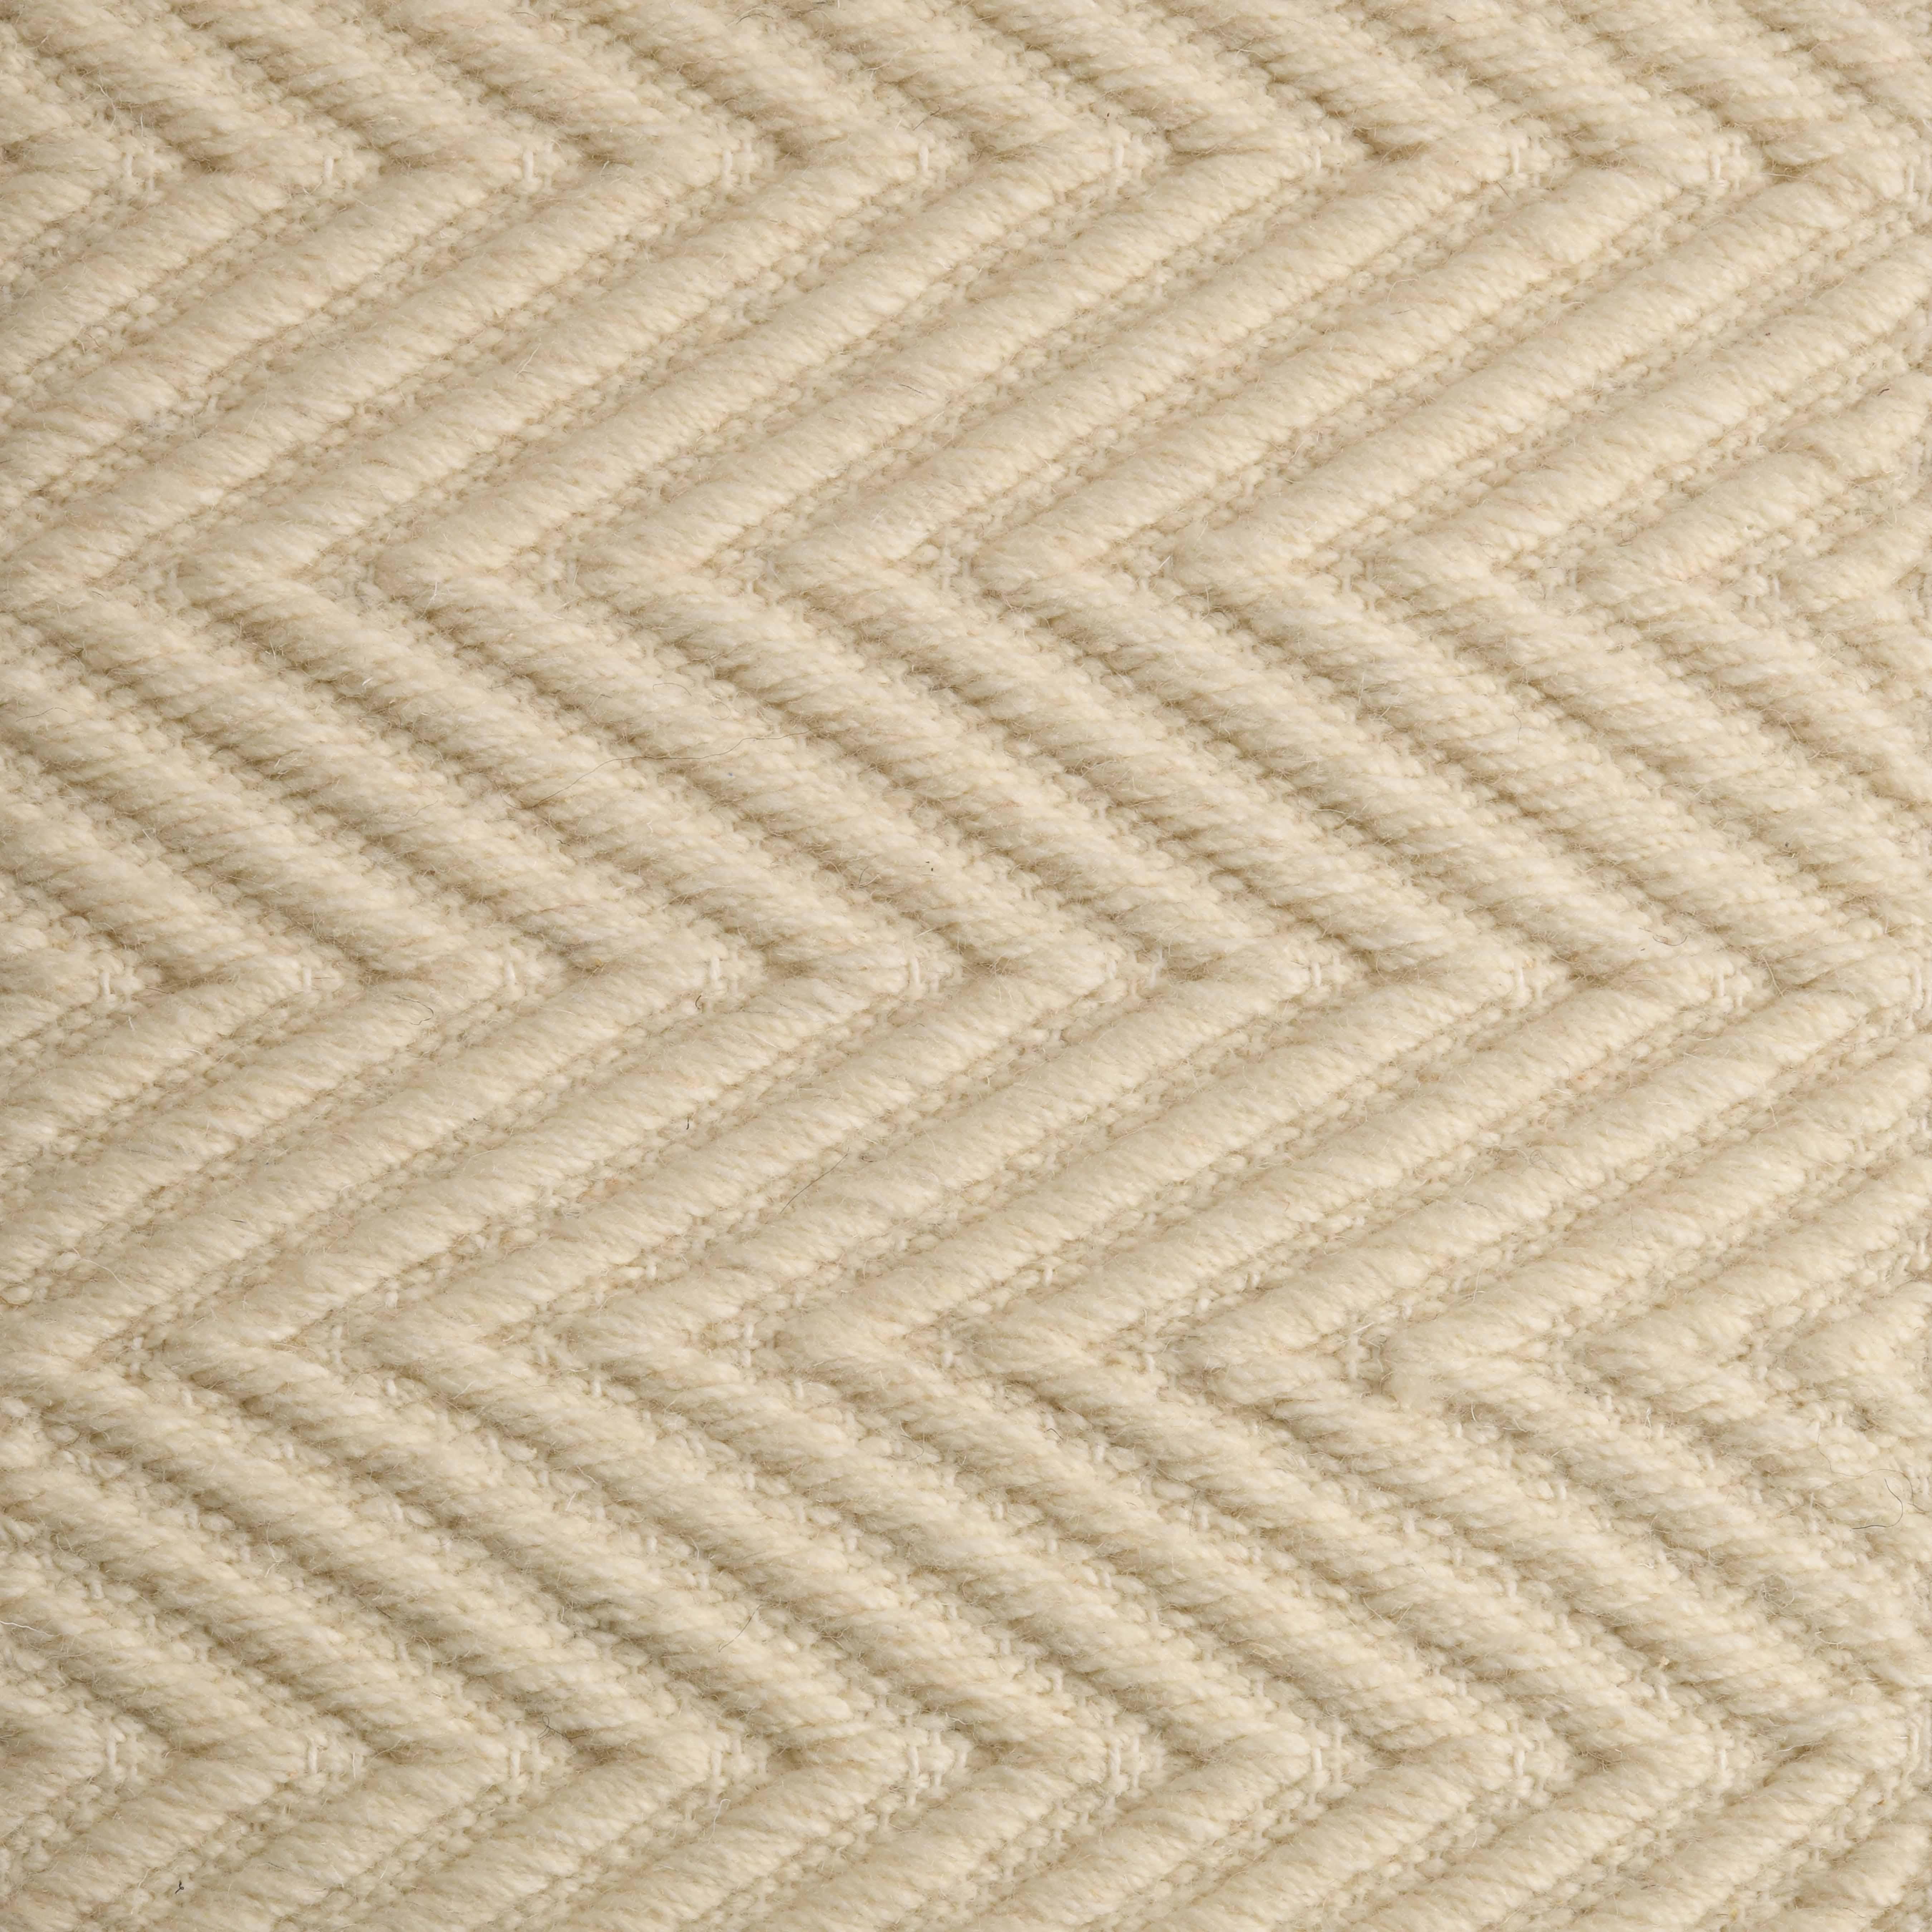 Lanx, Ivory, Handwoven Face 60% Undyed NZ Wool, 40% Undyed MED Wool, 6' x 9'